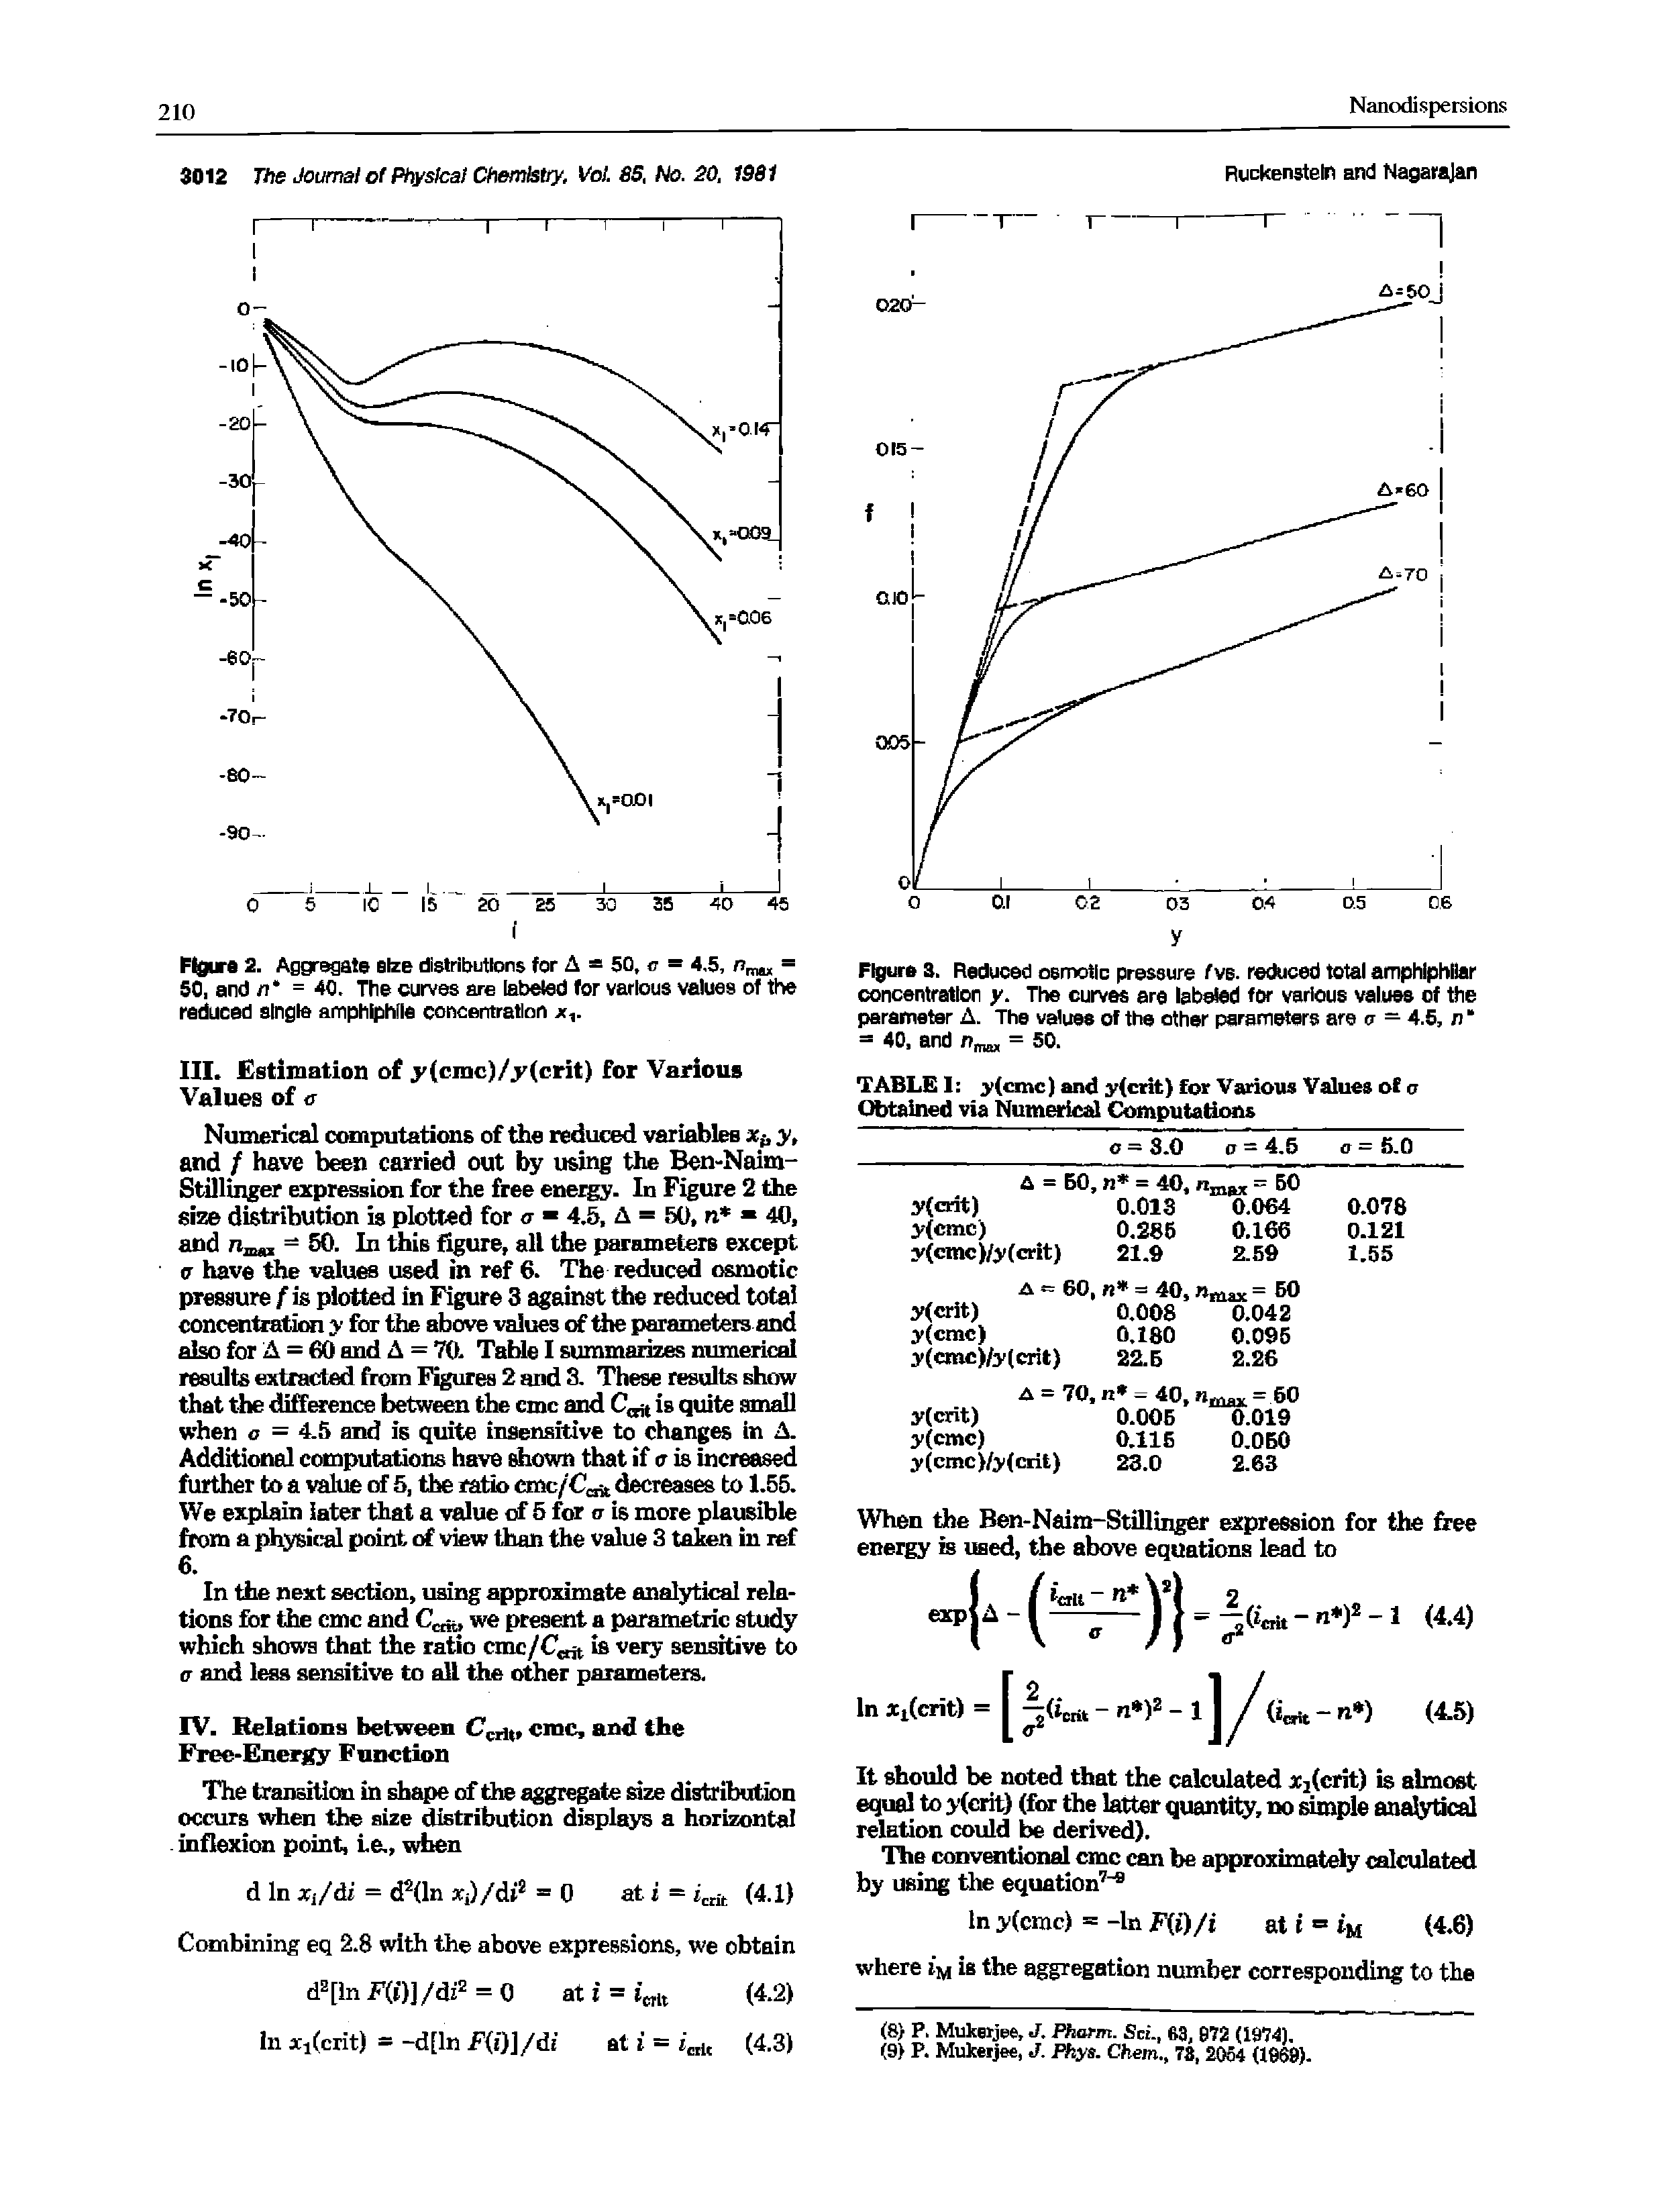 Figure 2. Aggregate size distributions for A = 50, < = 4,5, n , = 50, and n =40. The curves are labeled for various values of the reduced single amphiphlle concentration...